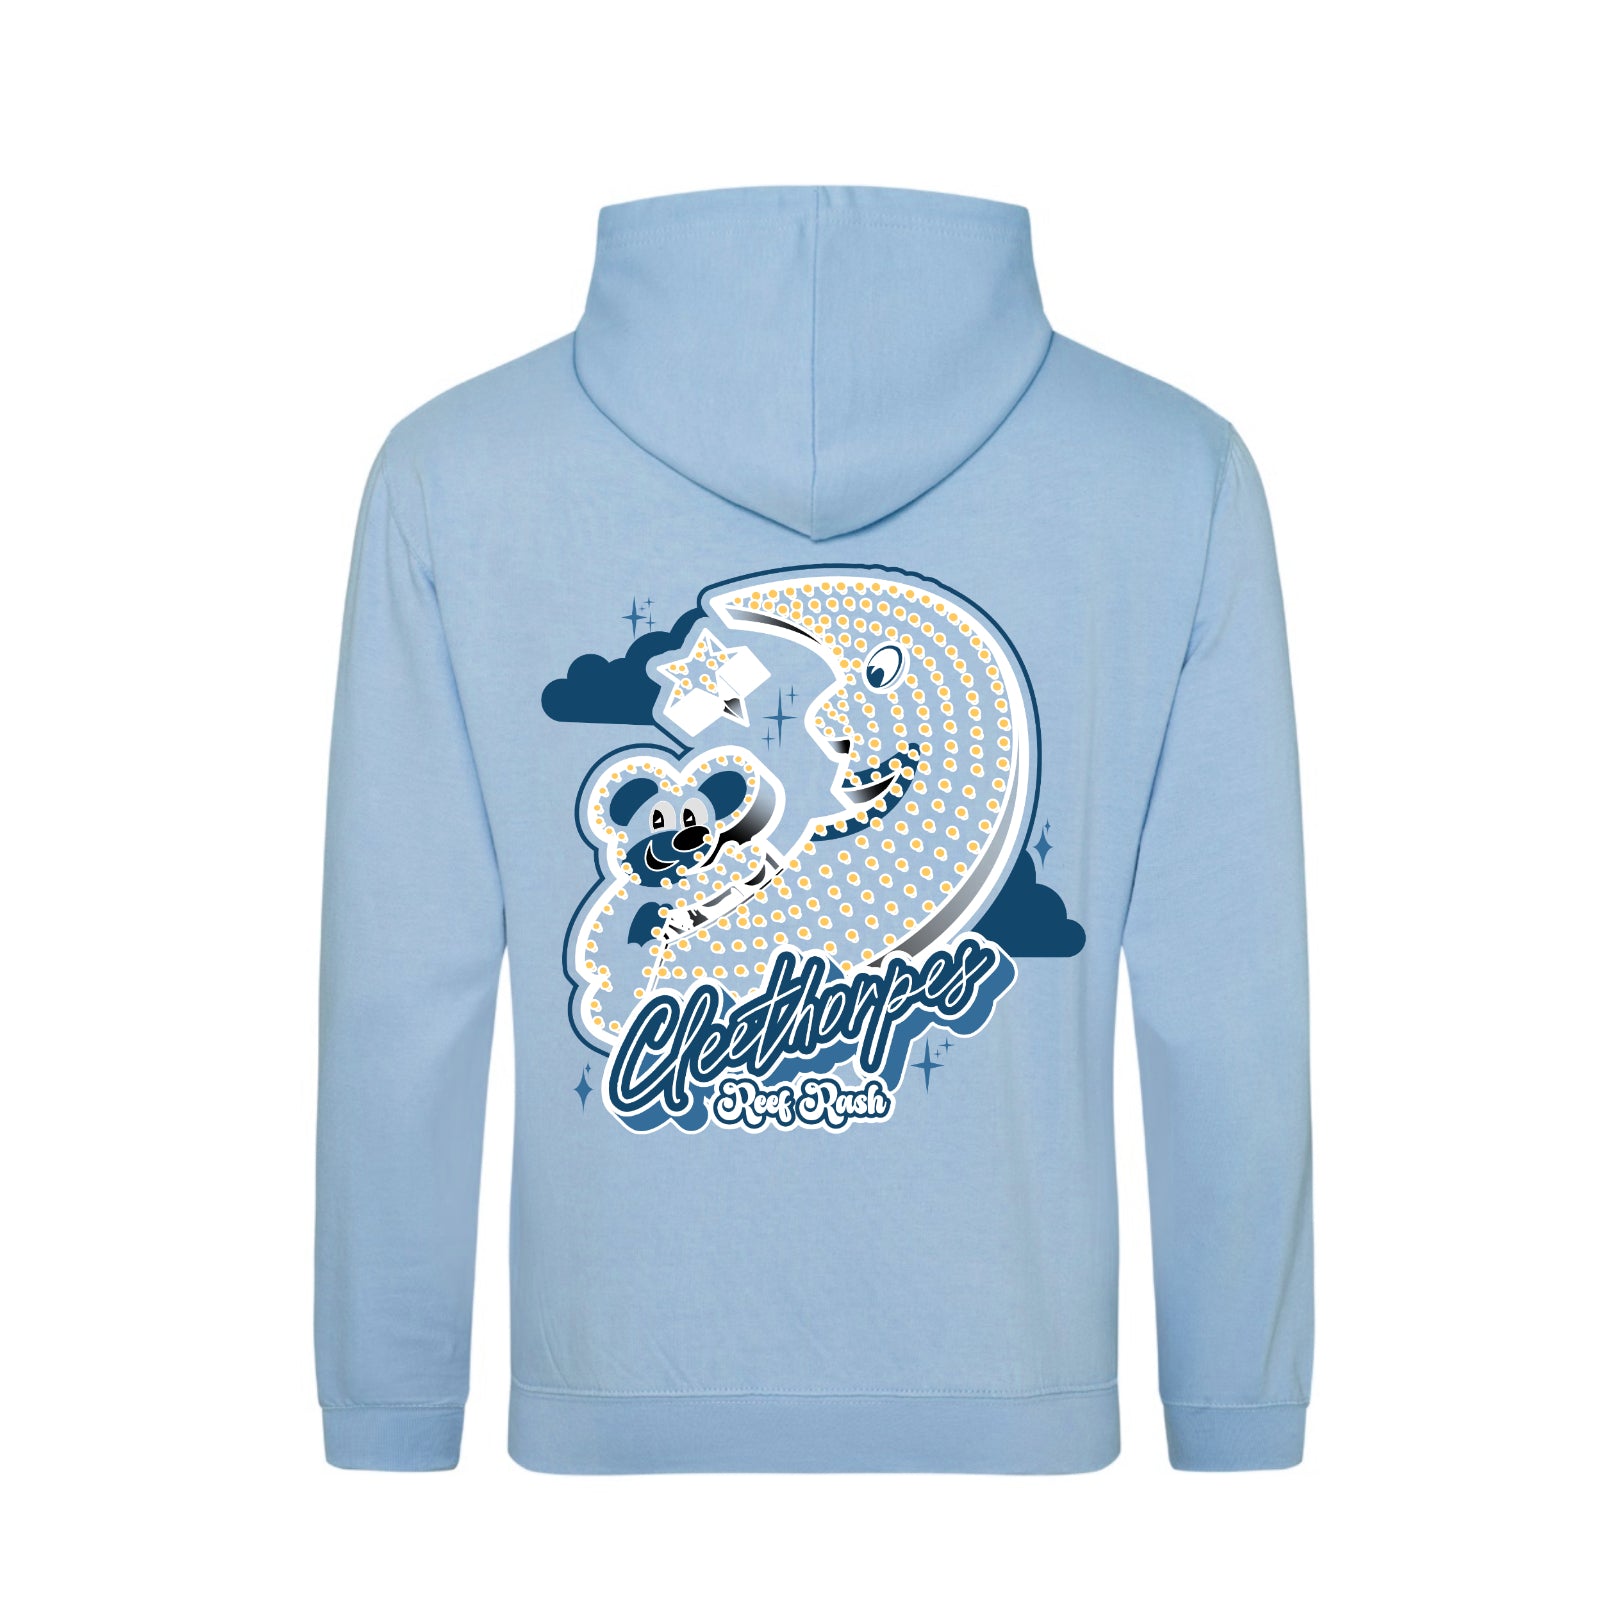 CLEETHORPES KIDS MOUSE AND MOON - BLUE